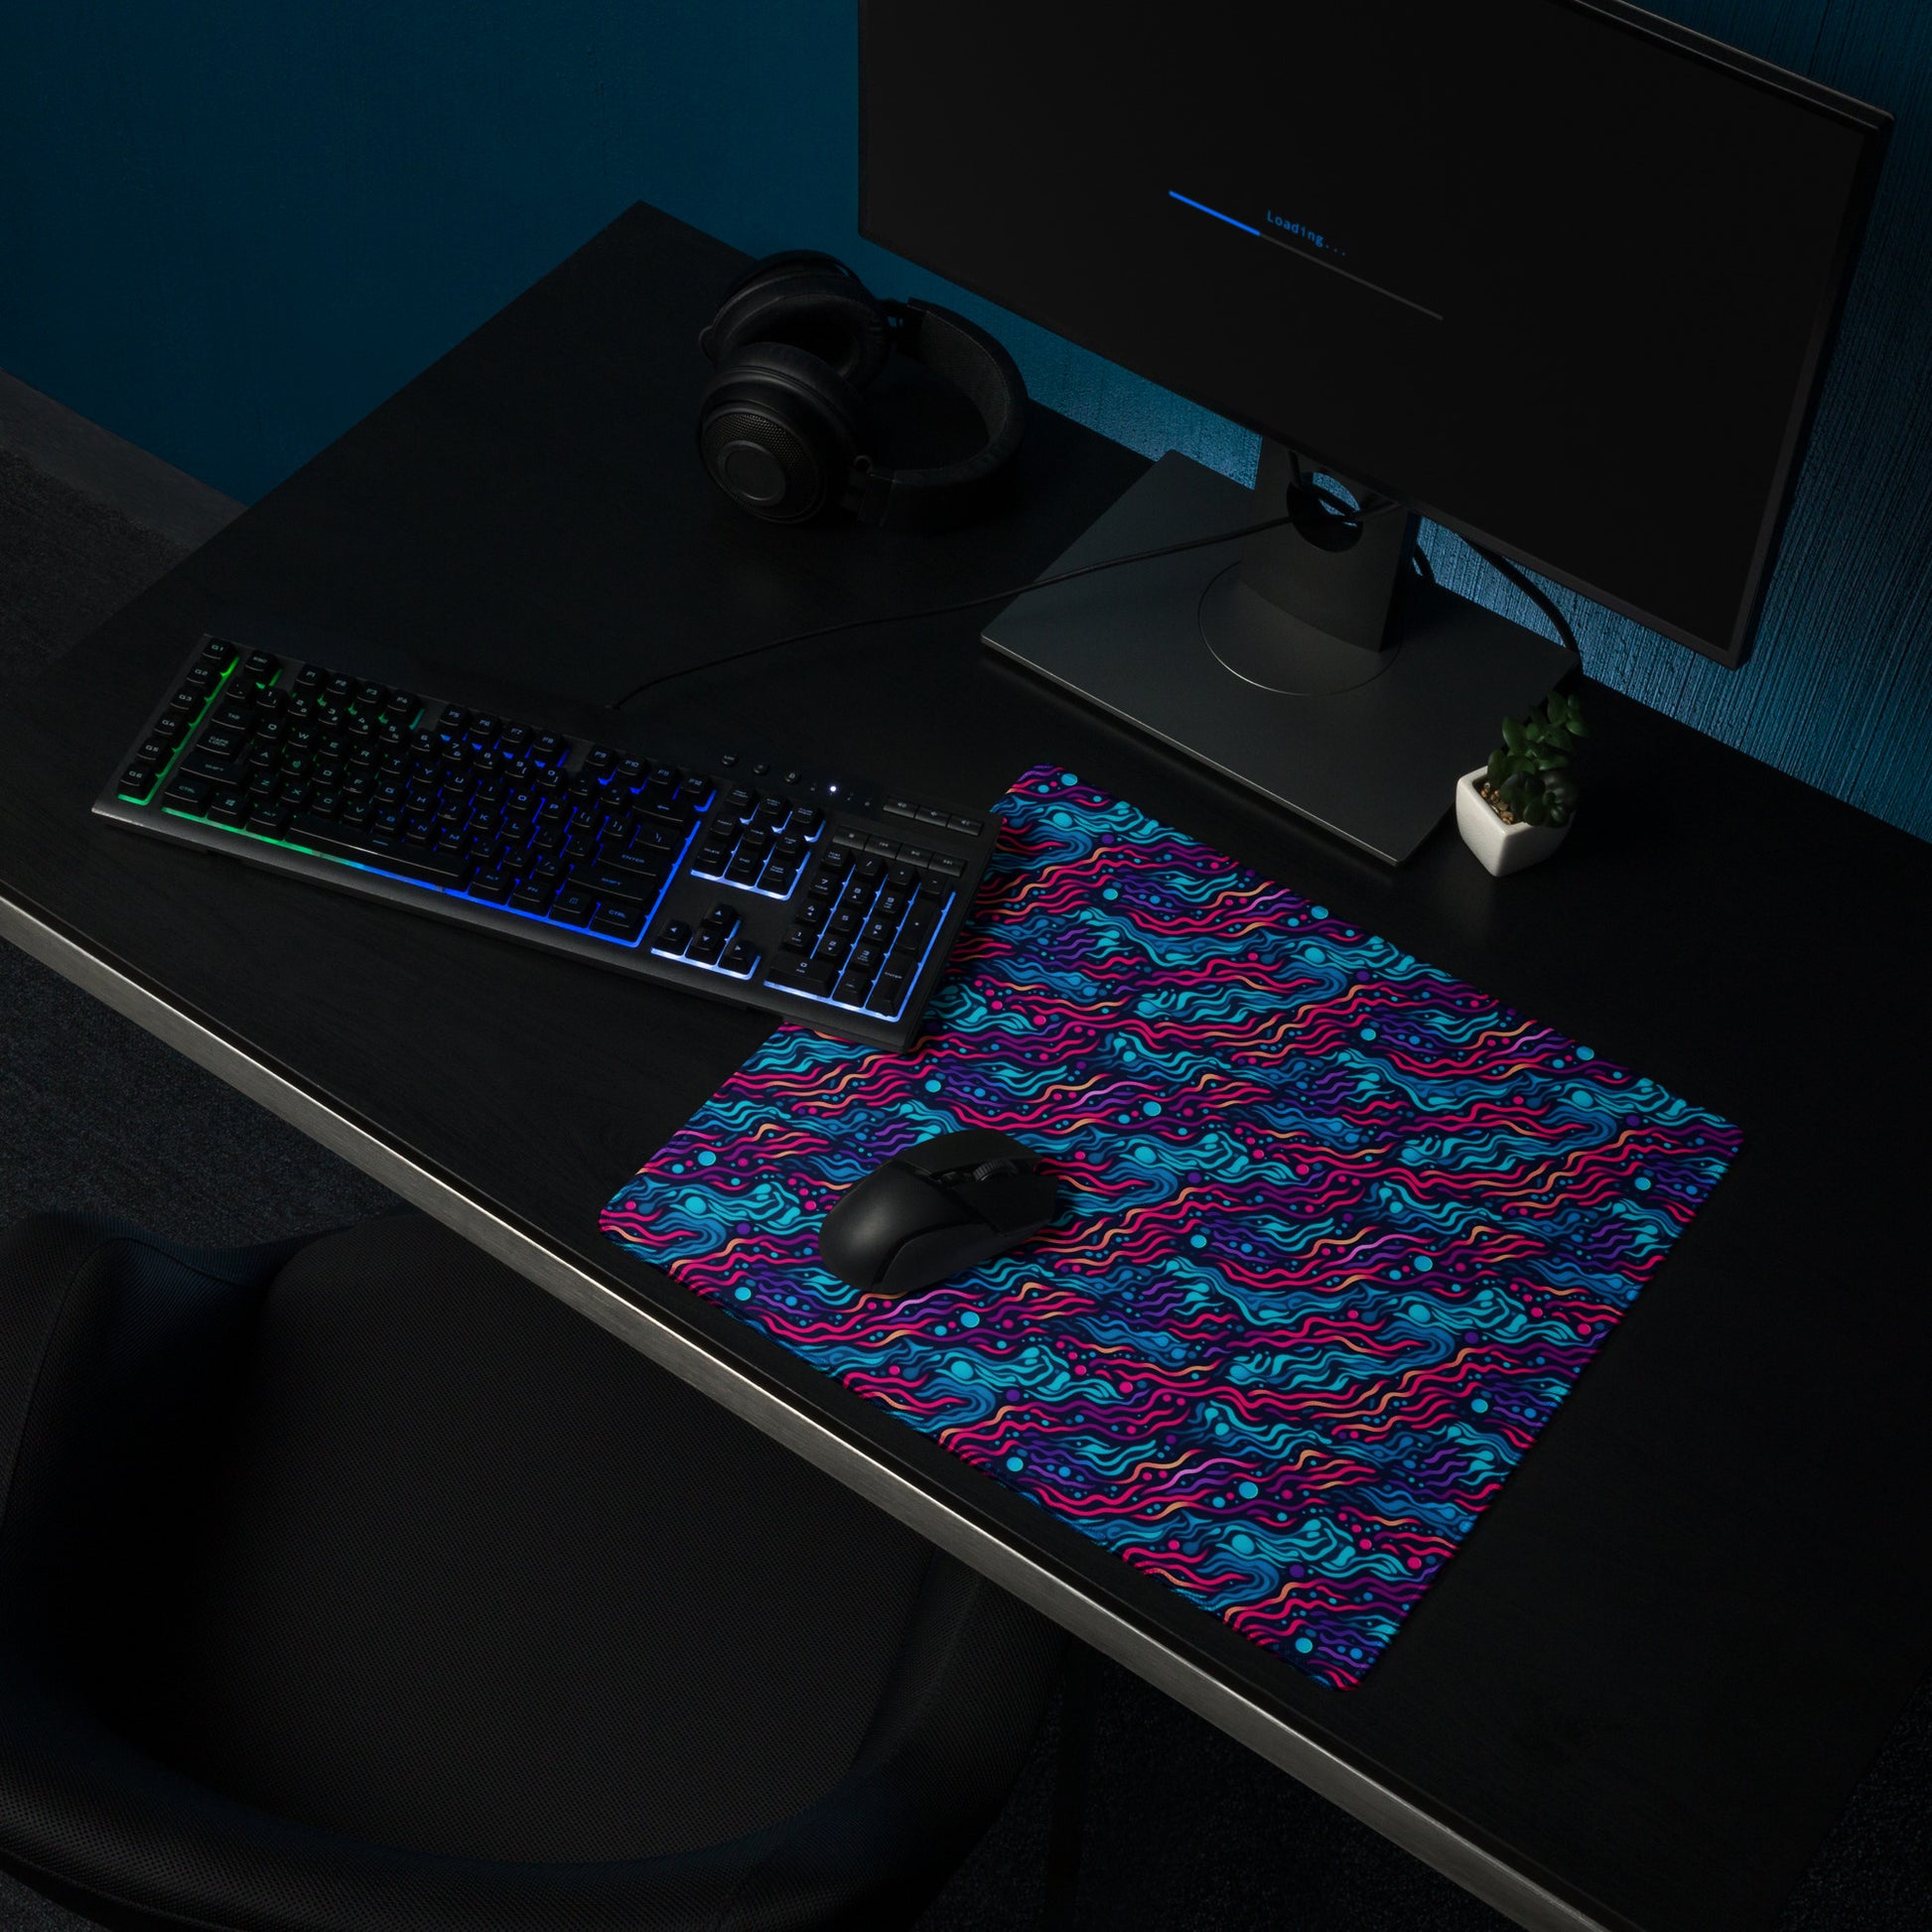 A 18" x 16" desk pad with wavy blue and pink pattern sitting on a desk